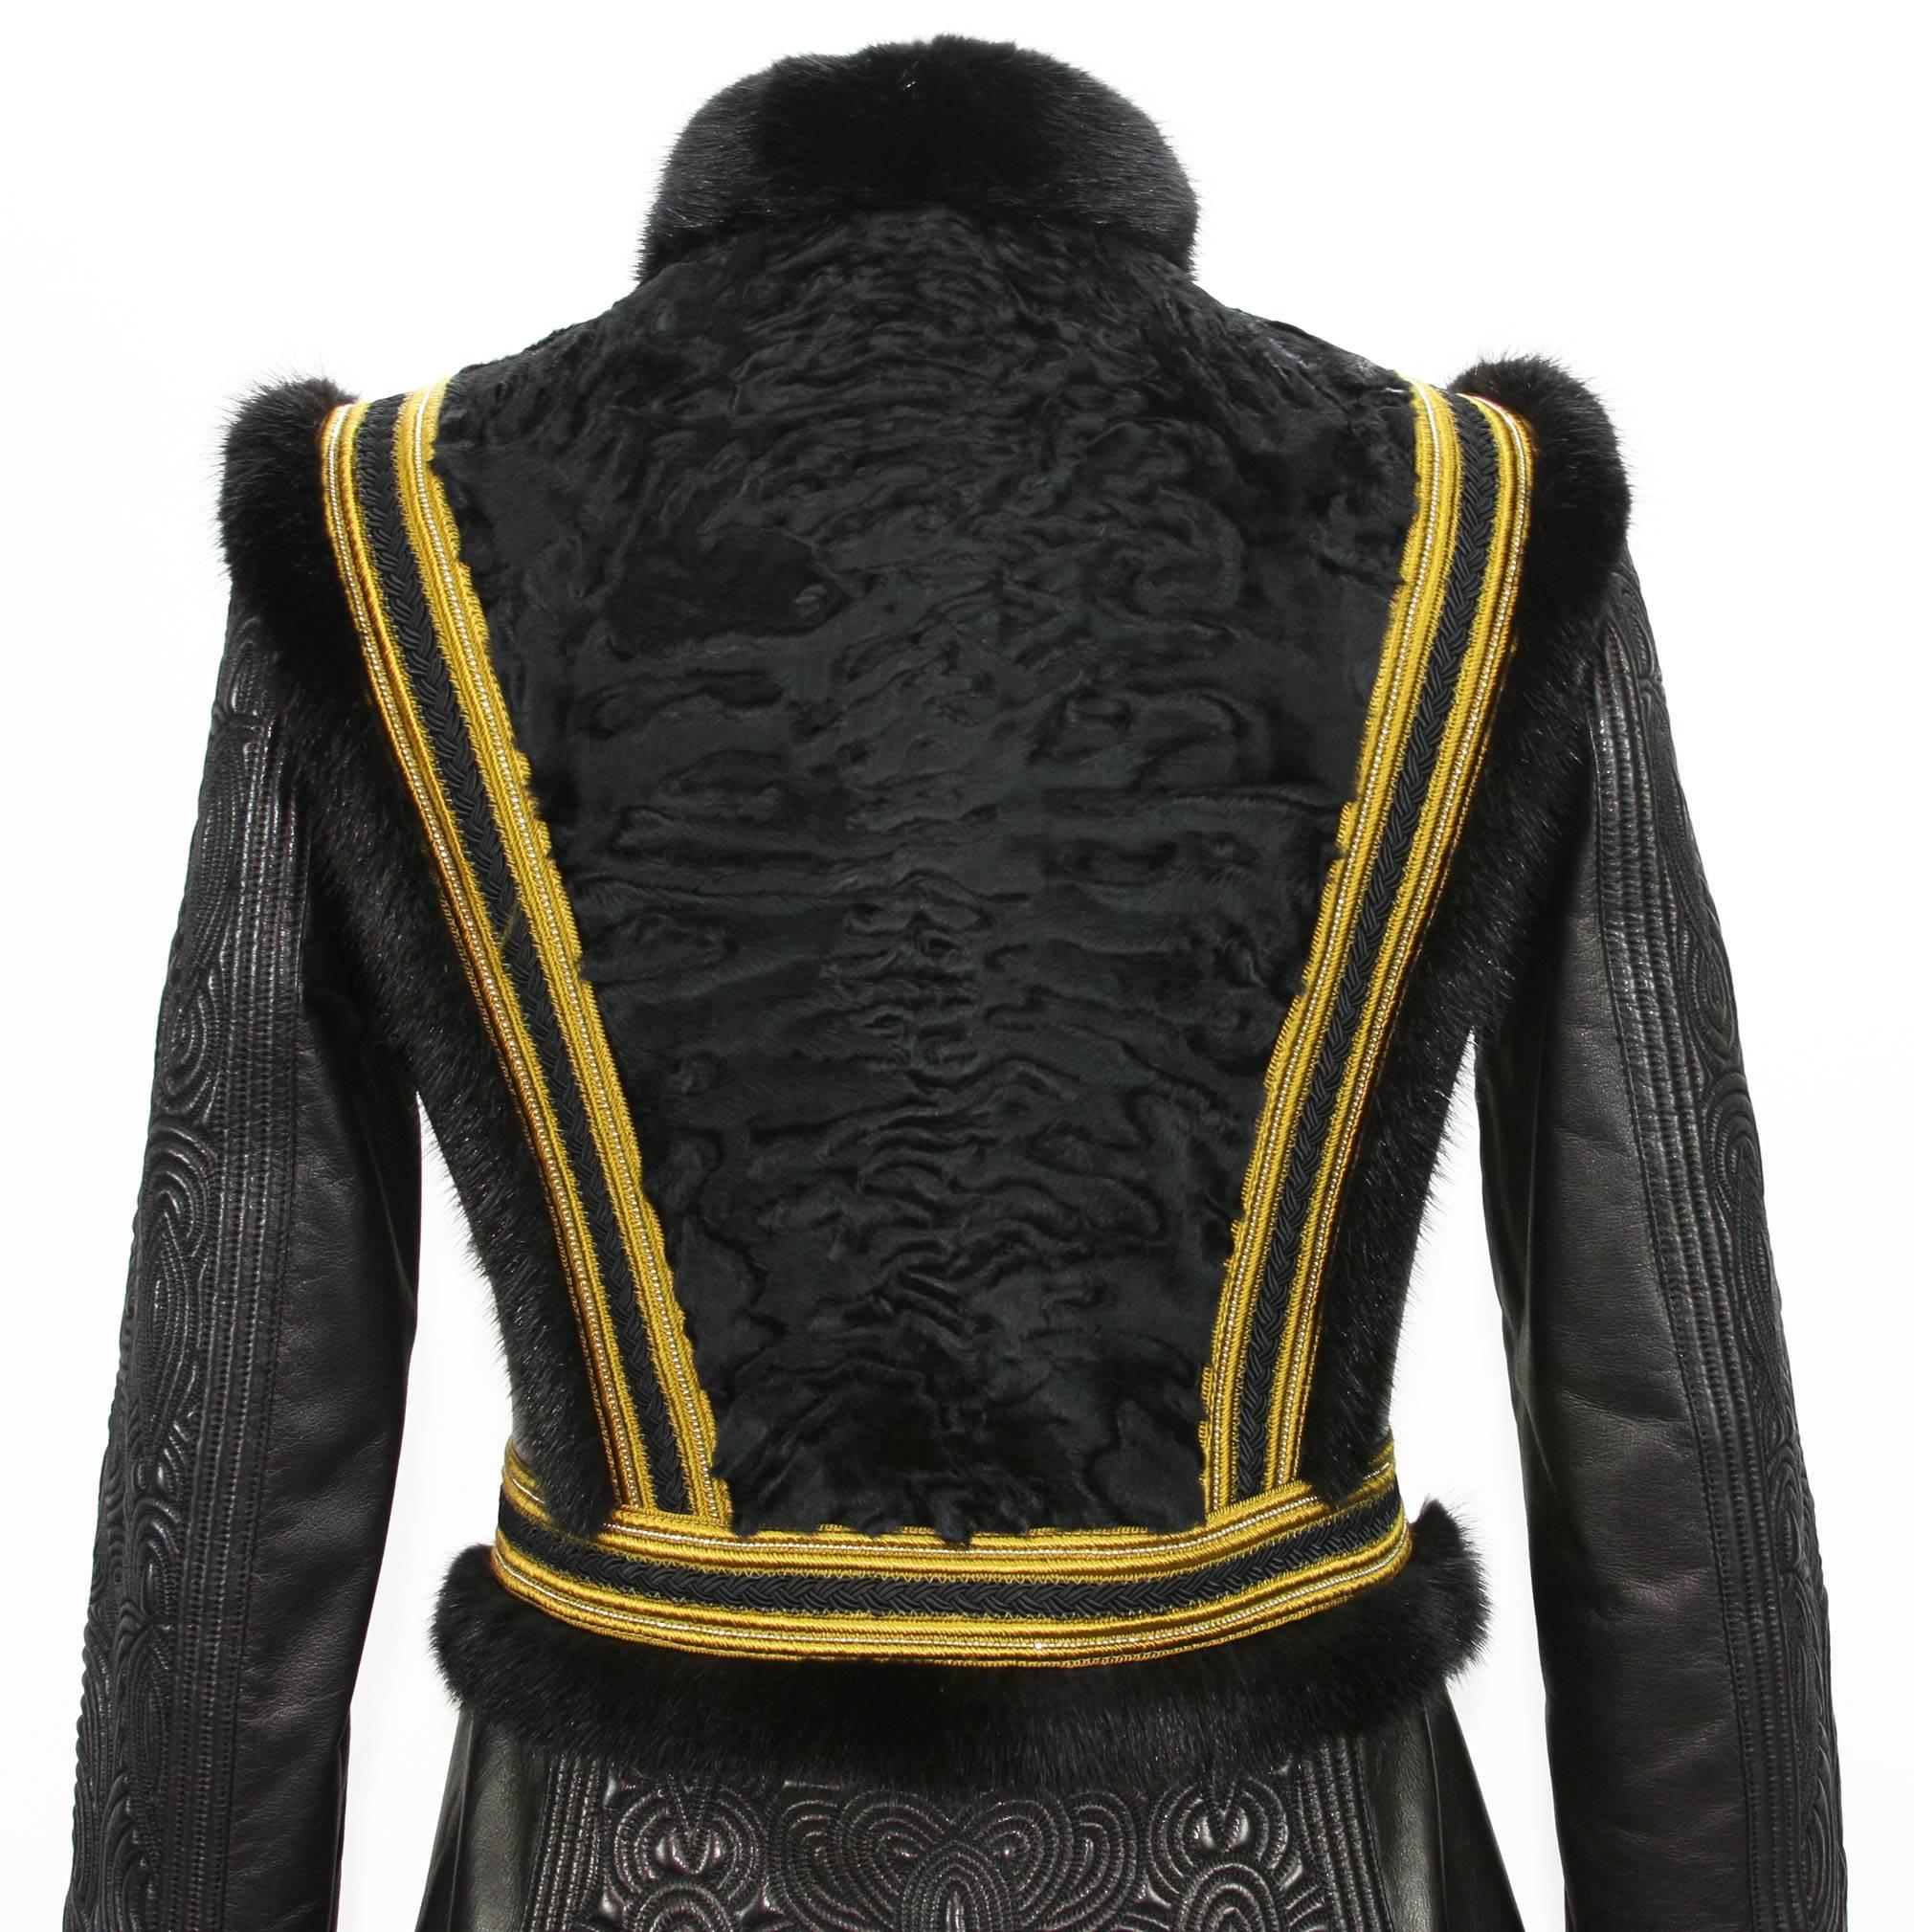 NEW Exquisite $7650 ETRO Embossed Leather Mink Fur Lamb Jacket It.42 - US 6 For Sale 2